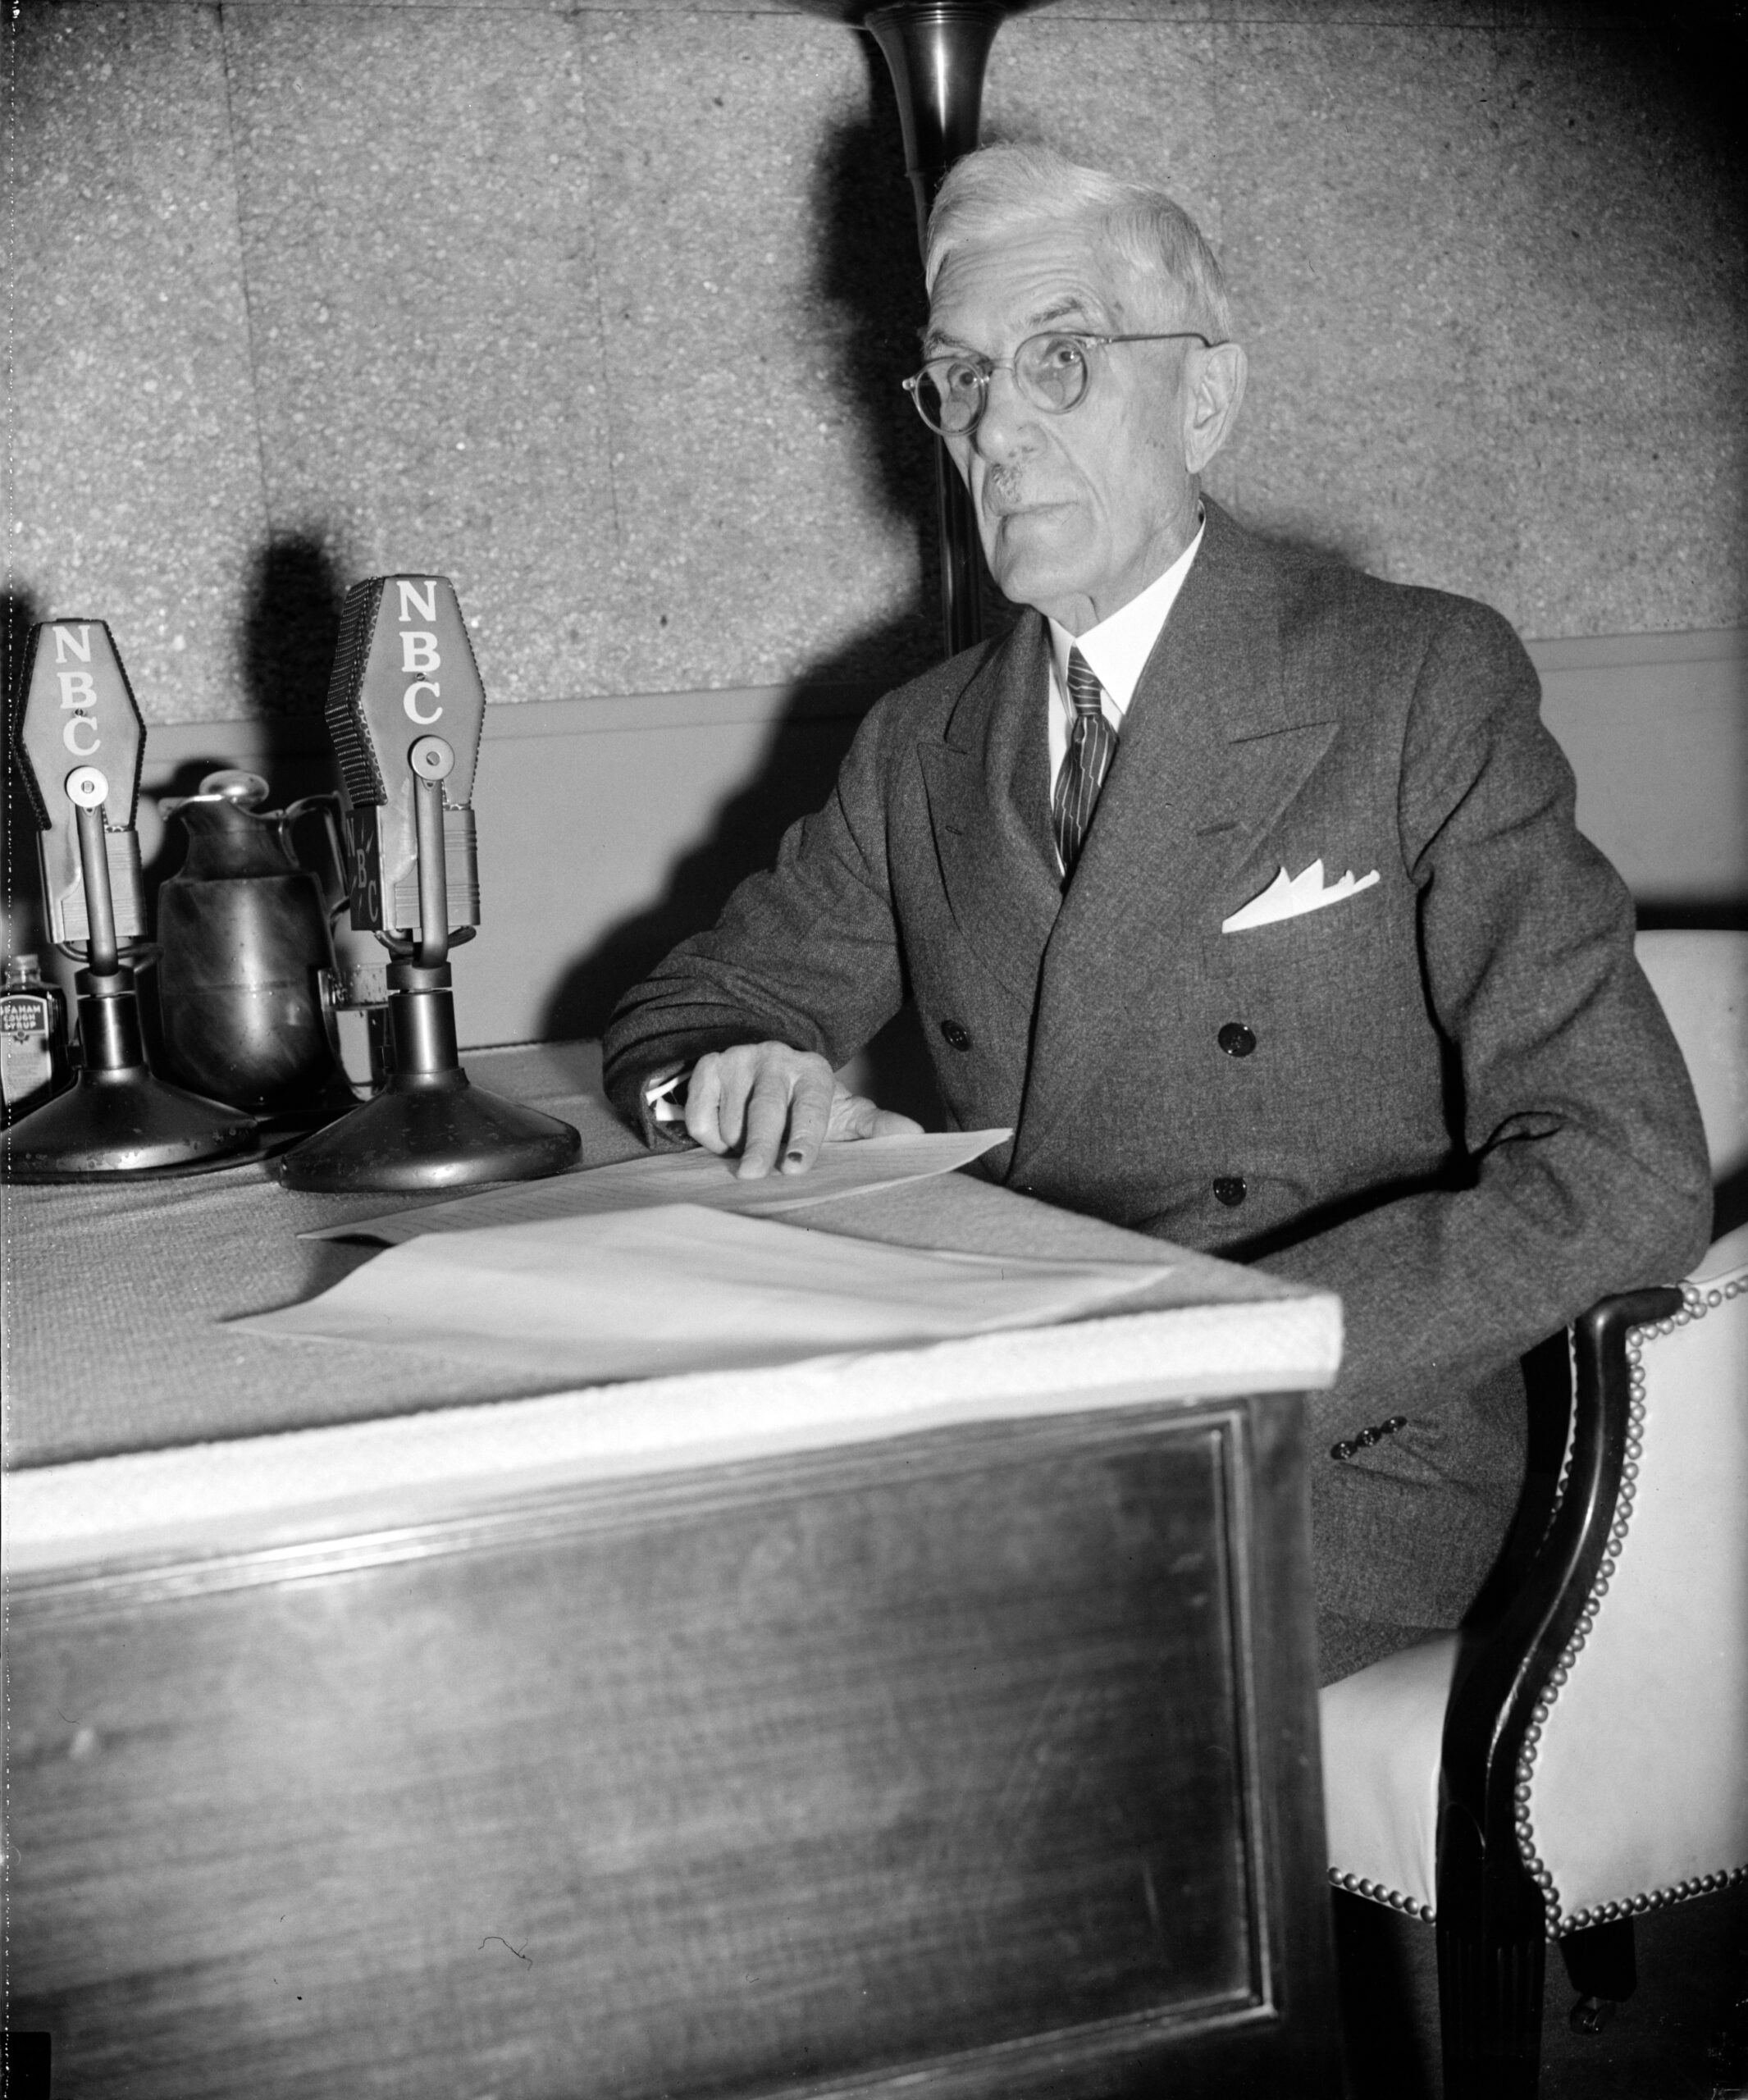 Dr. Francis Townsend sits at a desk reading off papers into microphones. 